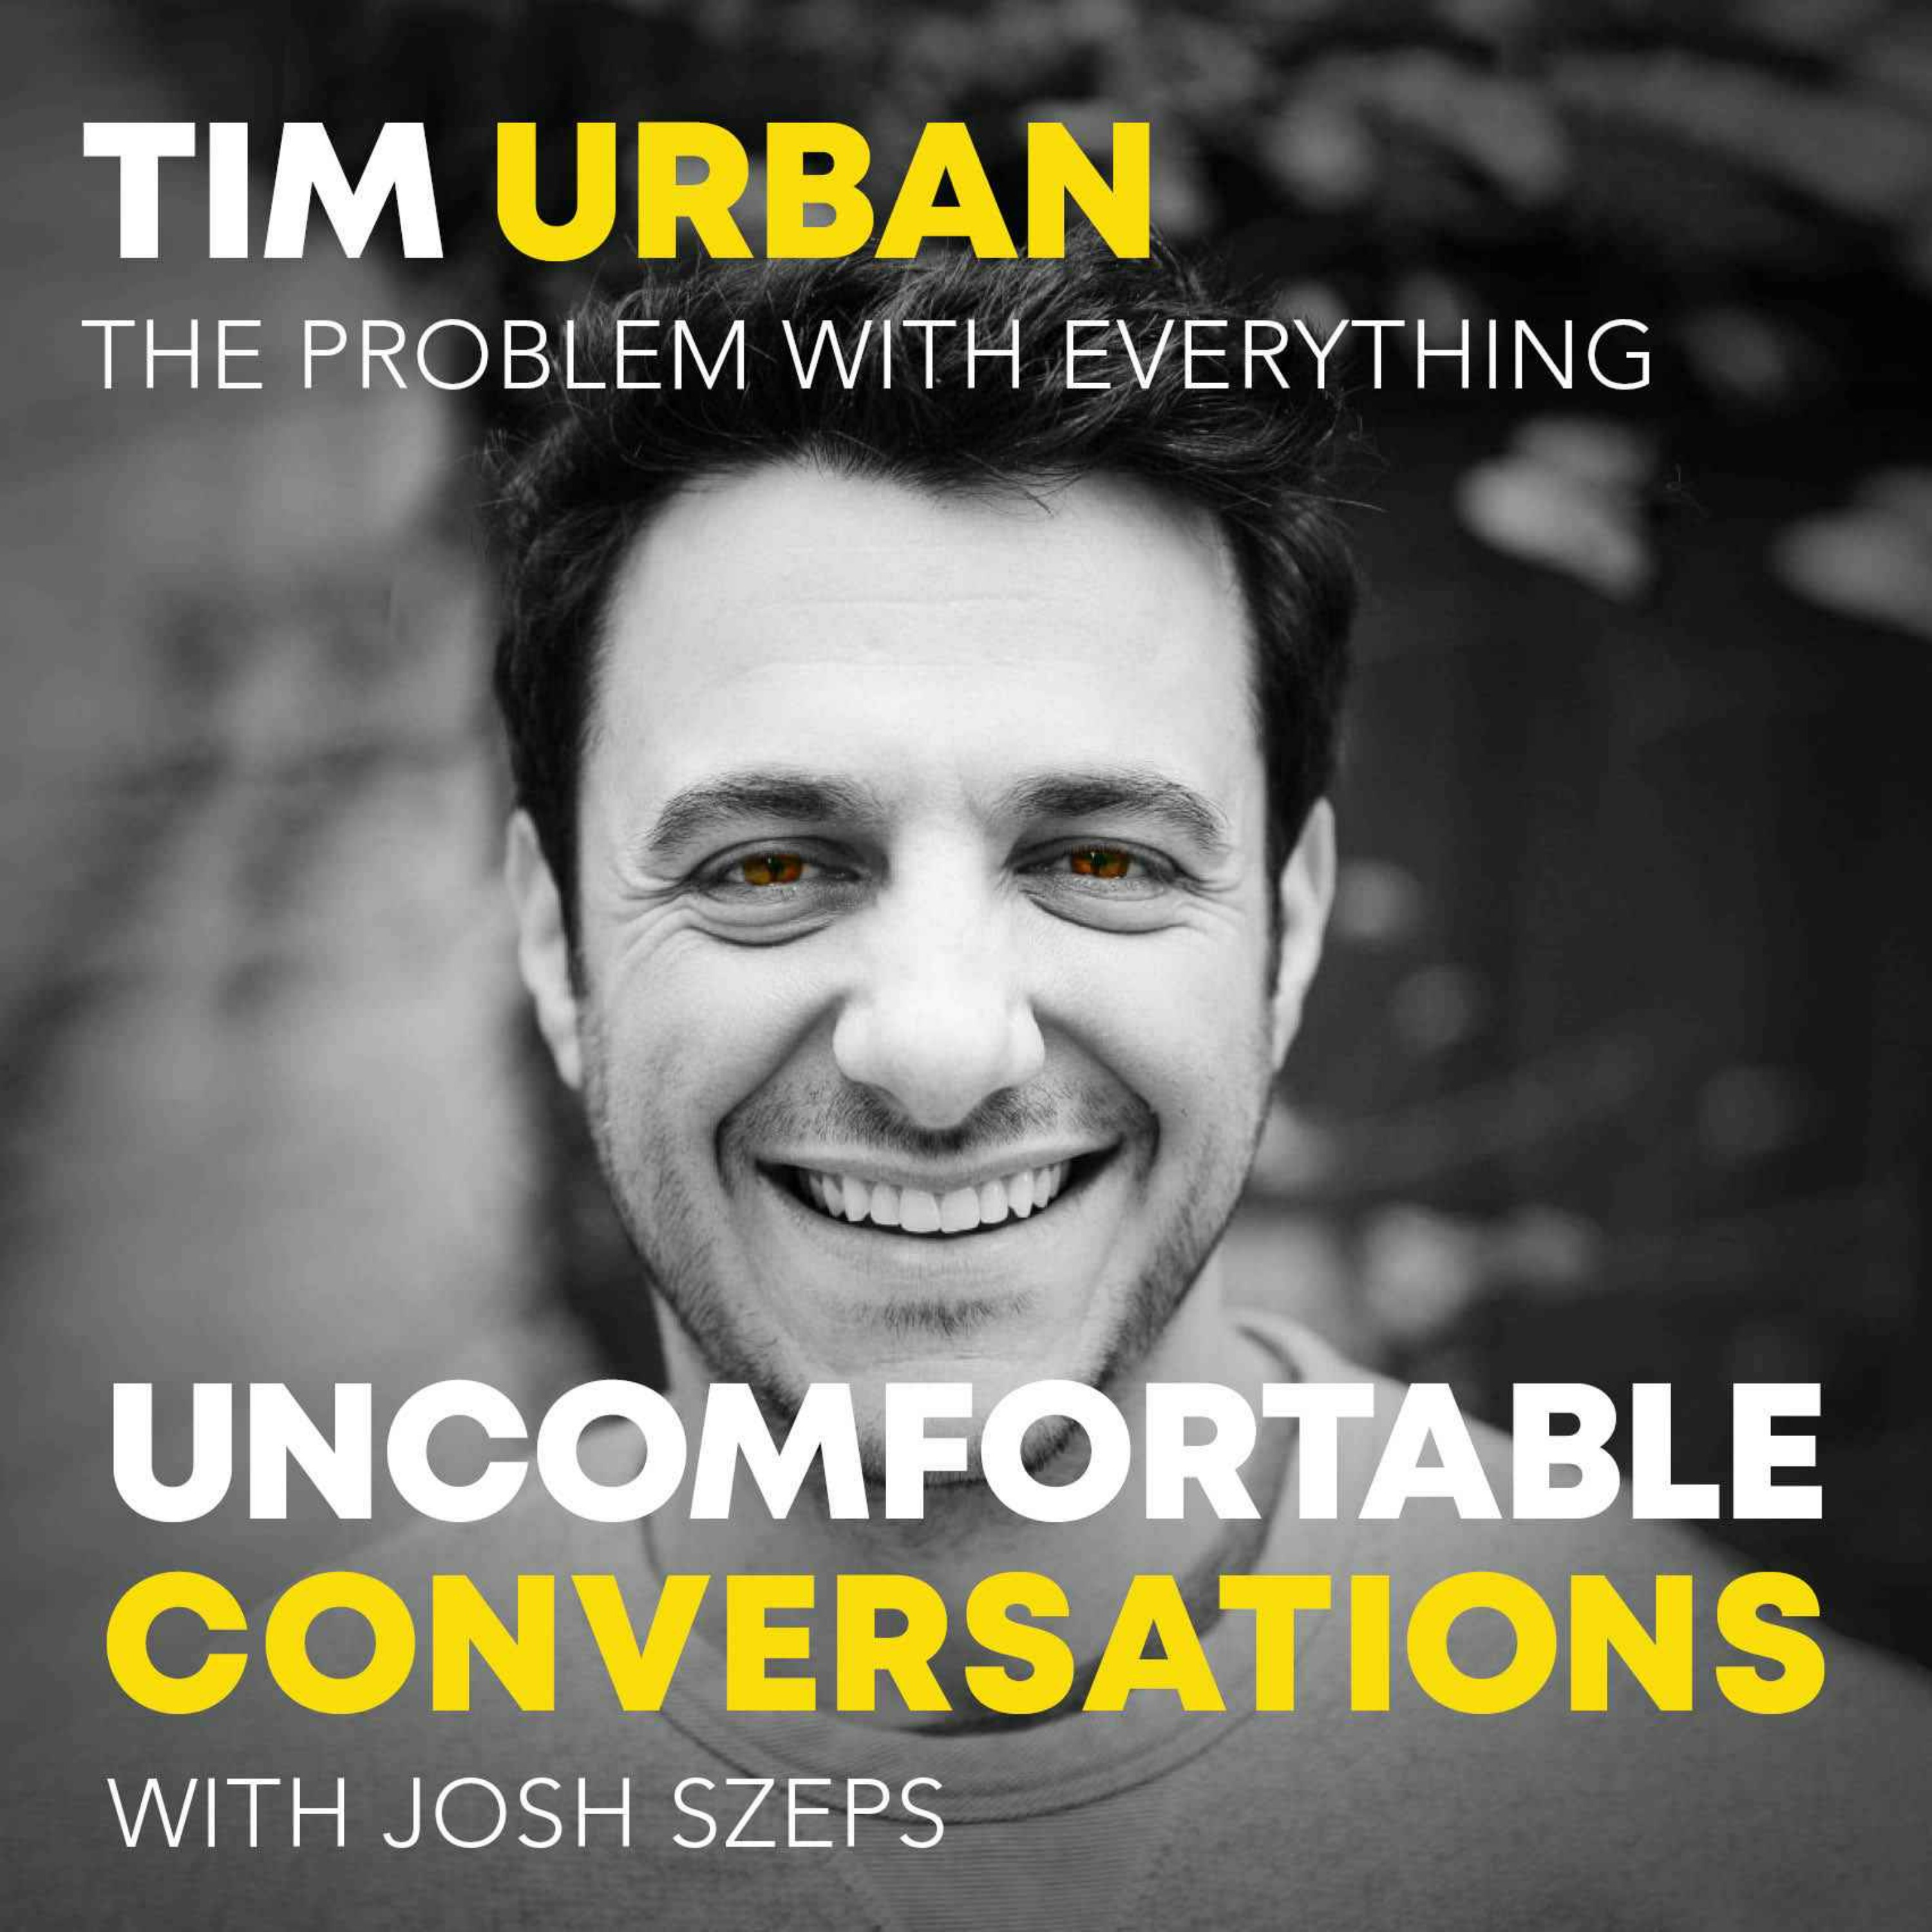 "The Problem With Everything" with Tim Urban